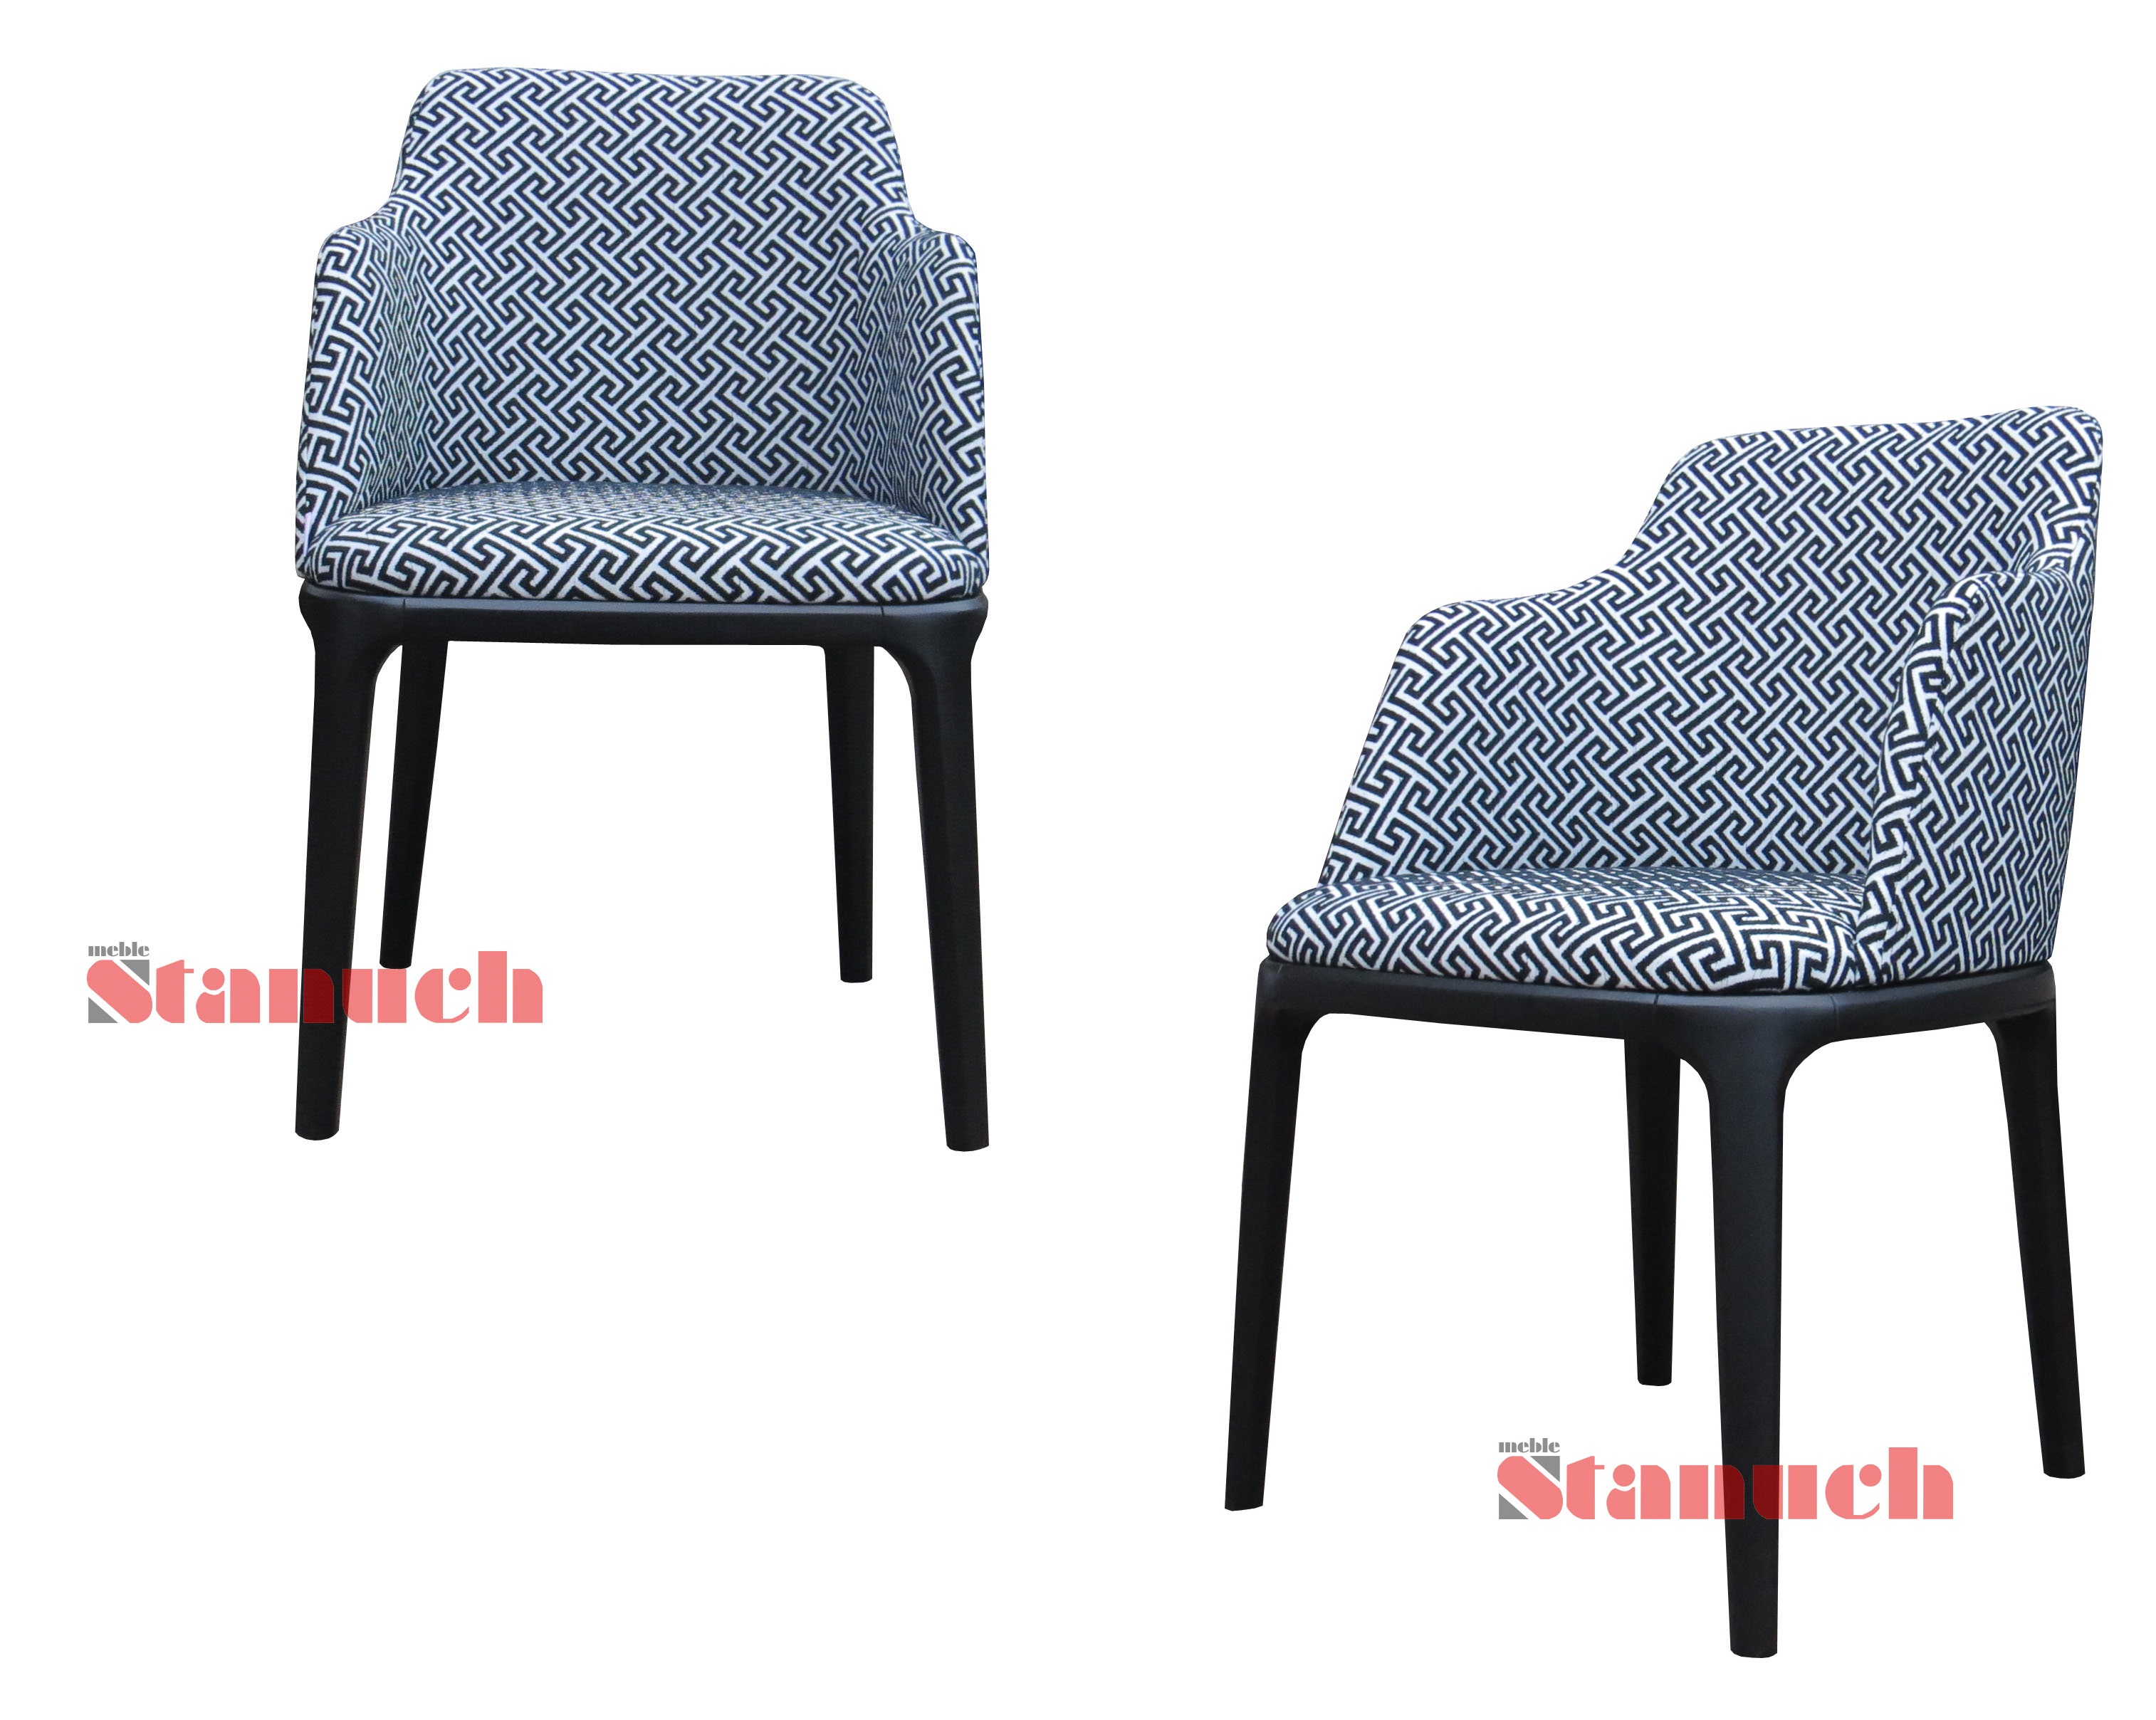 High bar stools and comfortable models with armrests